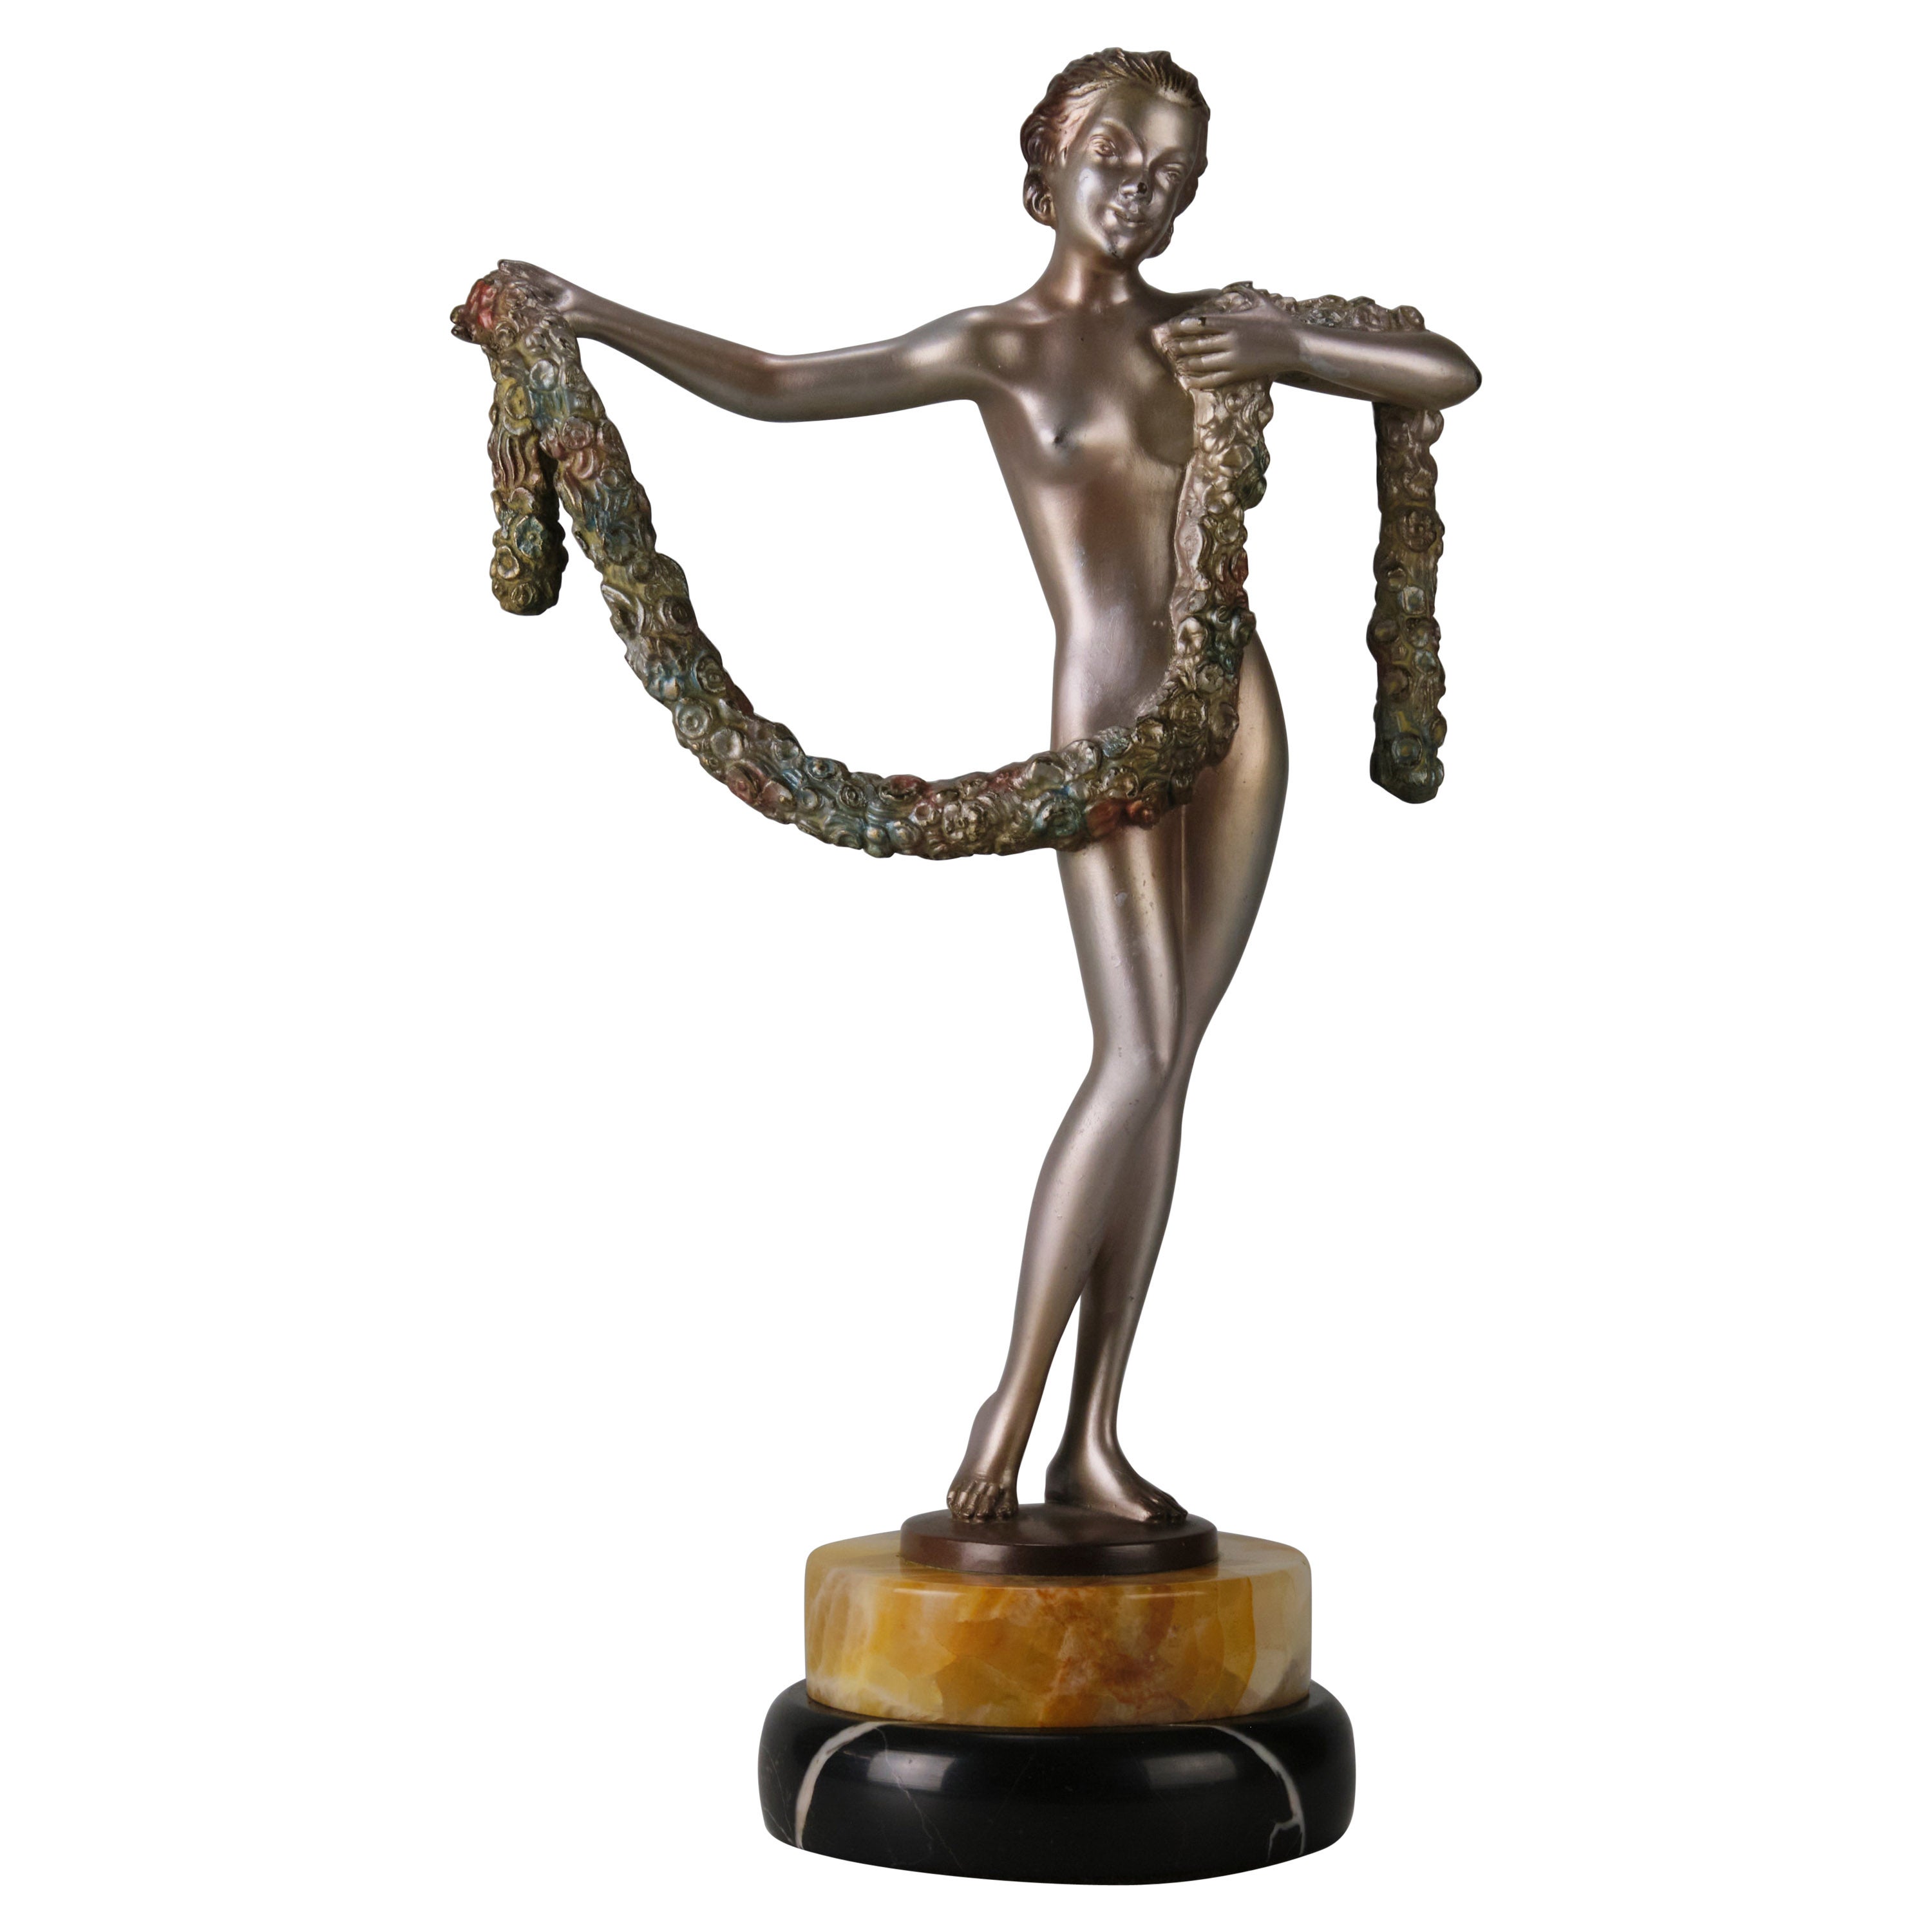 Early 20th C Cold-Painted Austrian Bronze Entitled "Garland Dancer" by Lorenzl For Sale